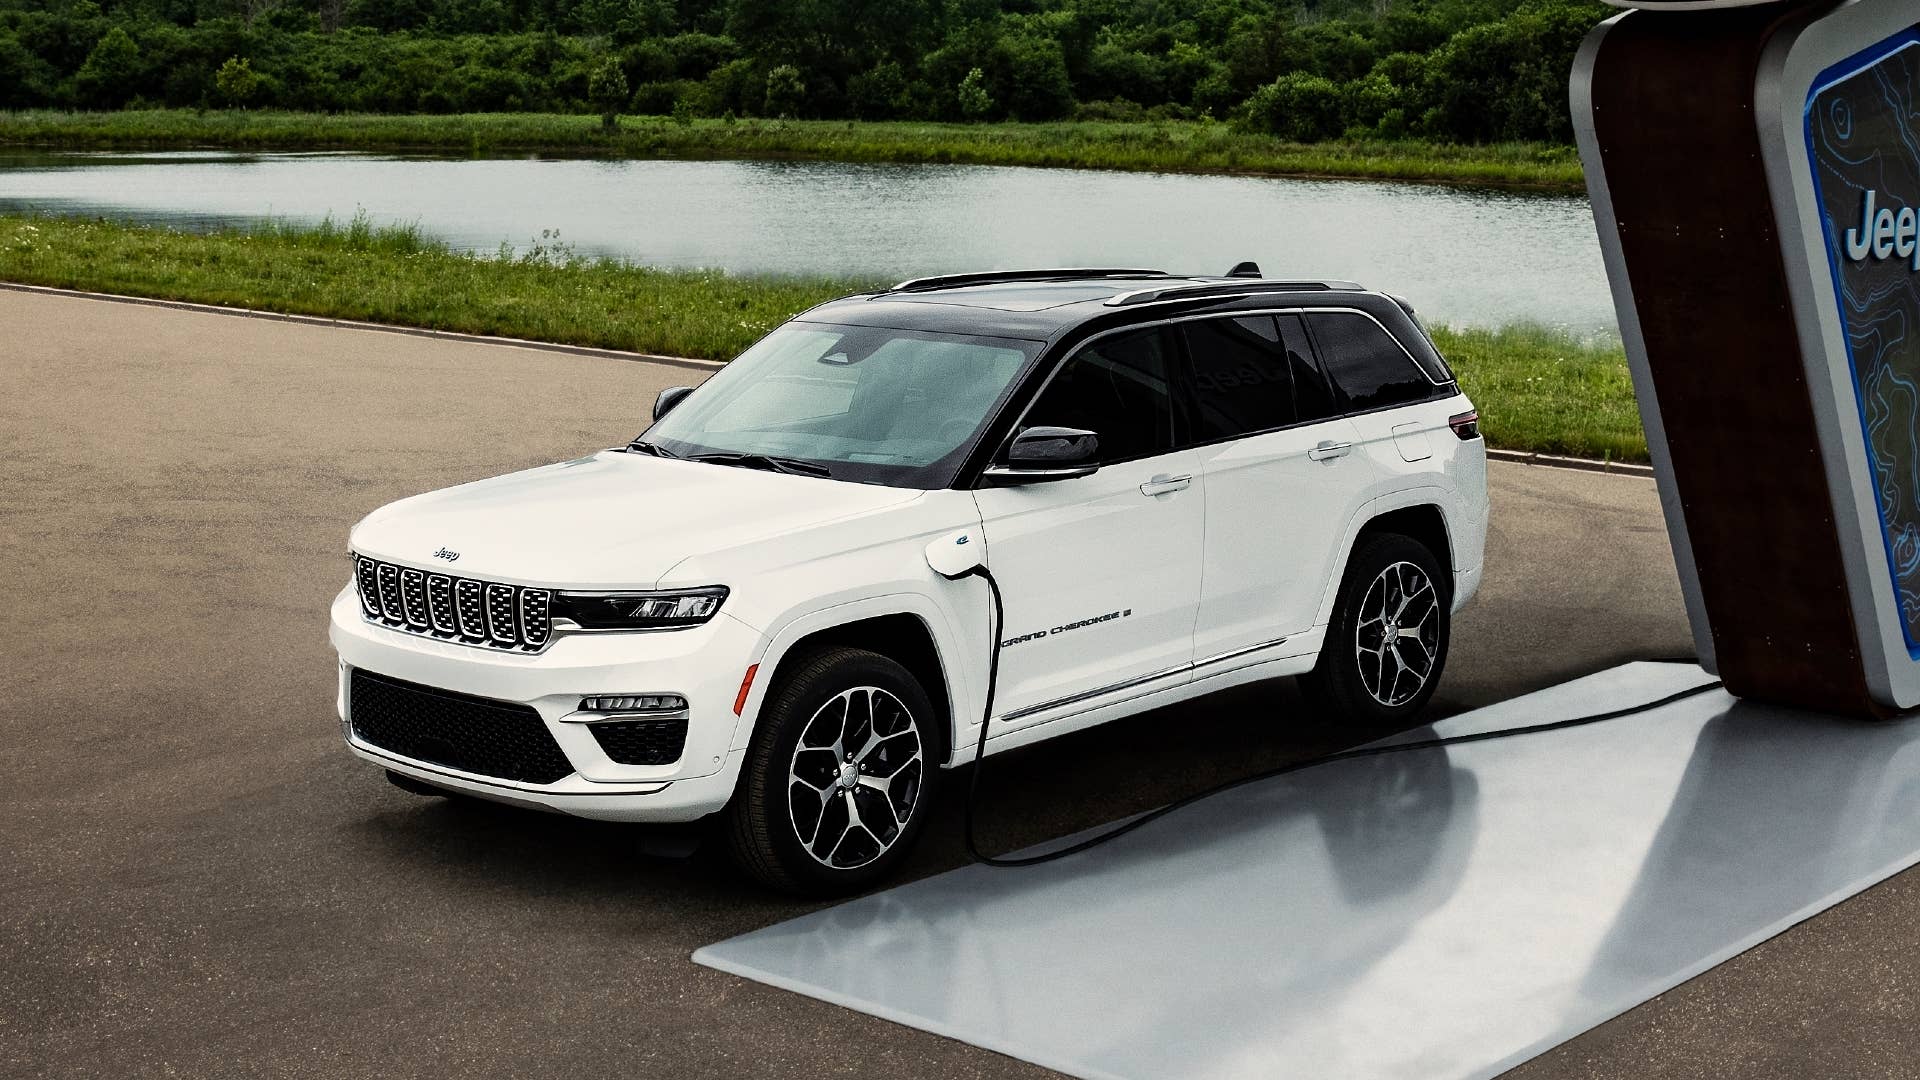 Here's Your First Look at the 2022 Jeep Grand Cherokee TwoRow SUV